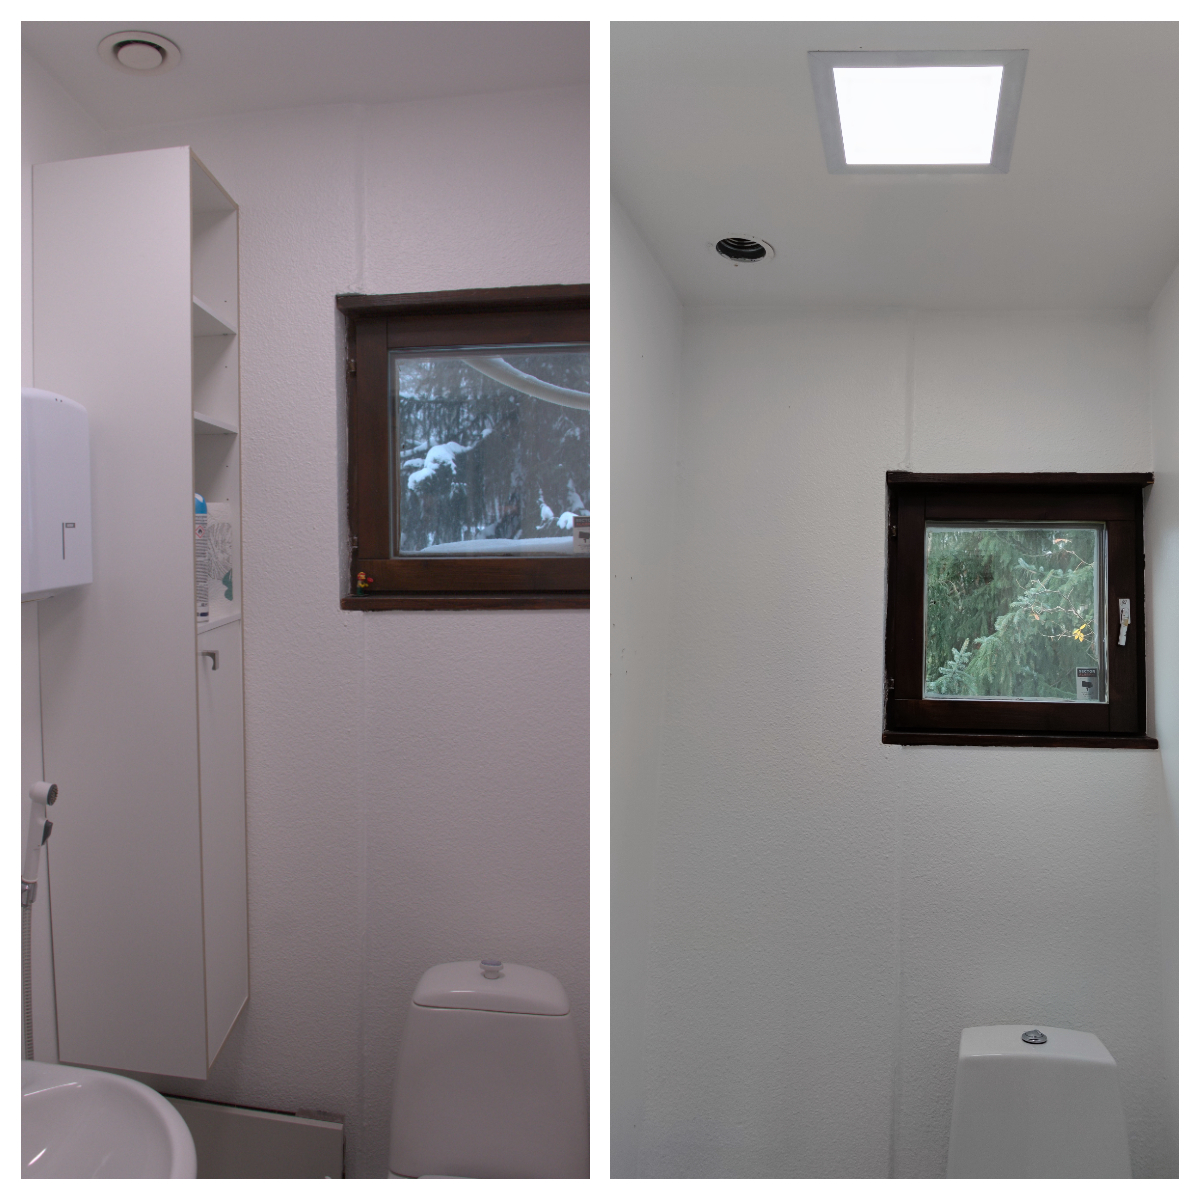 Before the renovation, the toilet was a bit dull and lit by a single LED panel.